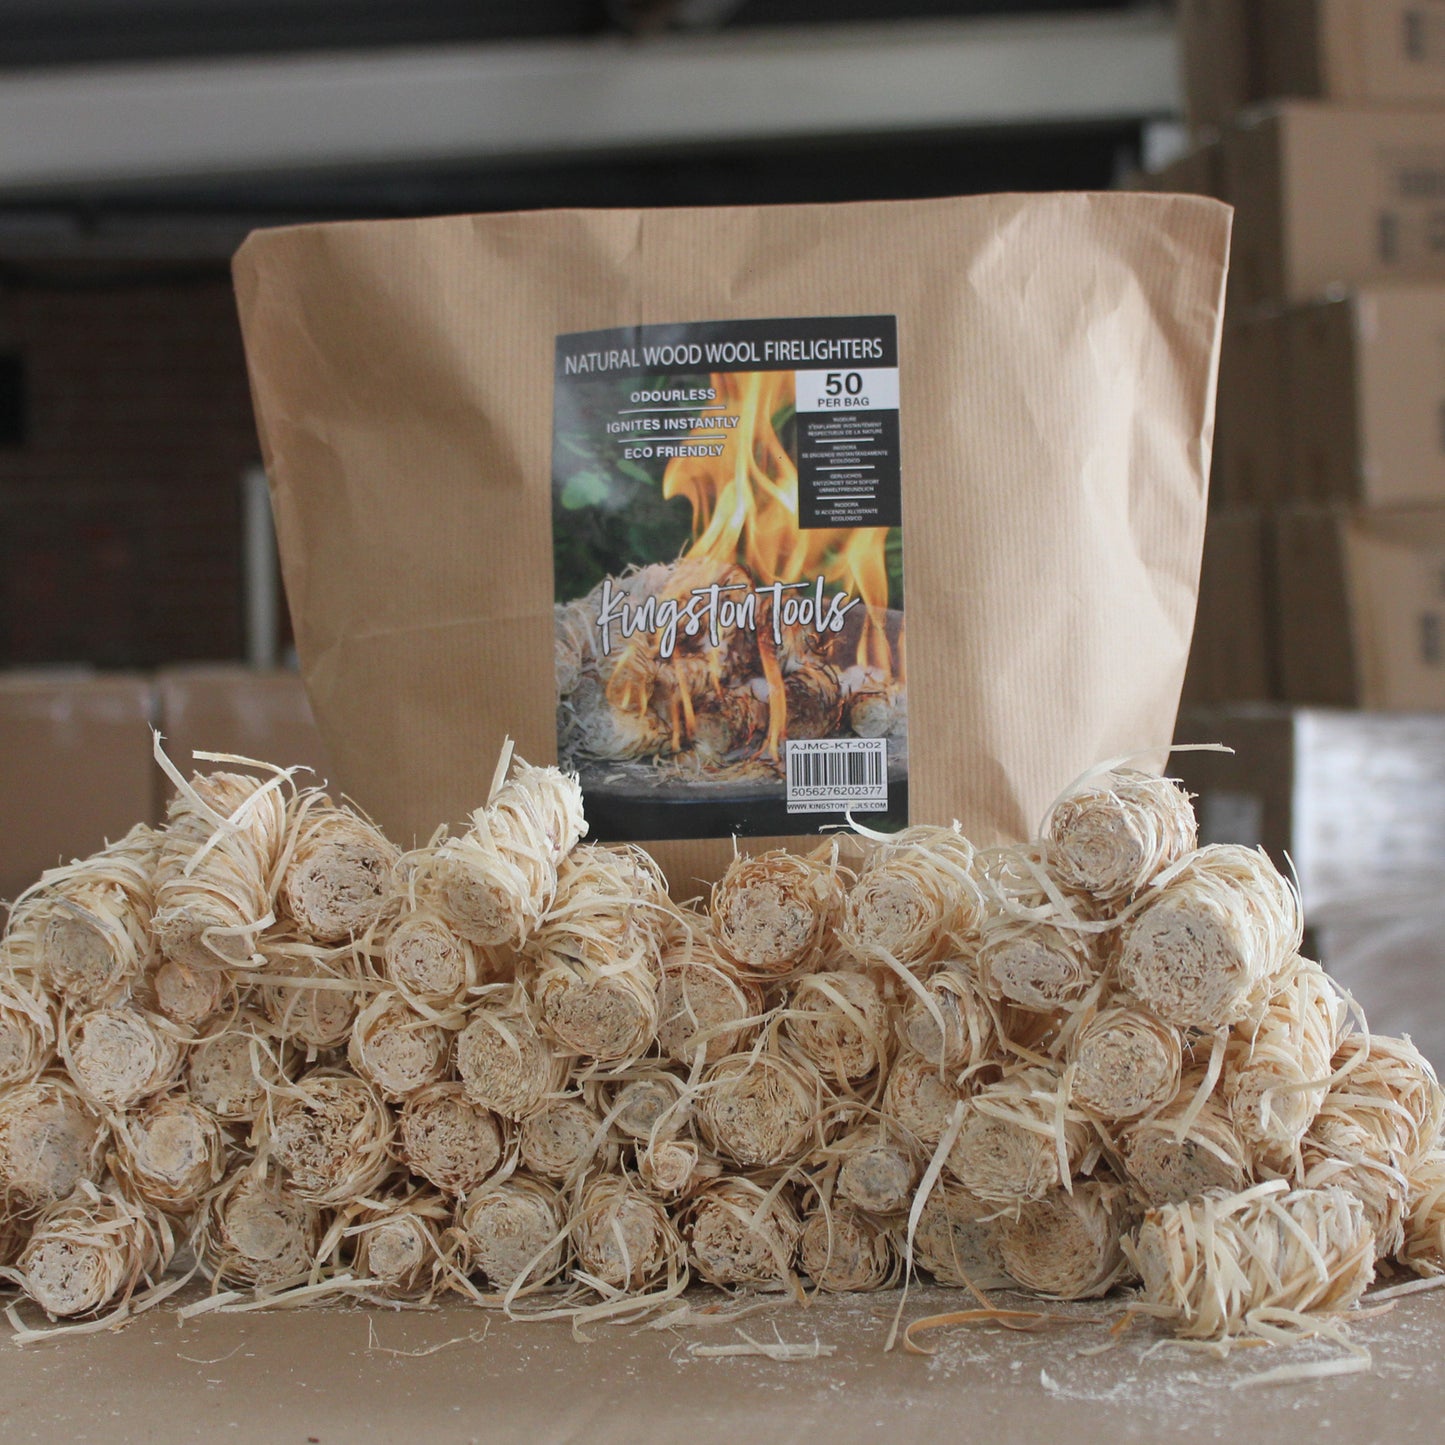 Natural Wood Wool Firelighters - Available in Bag of 20 and Box of 200